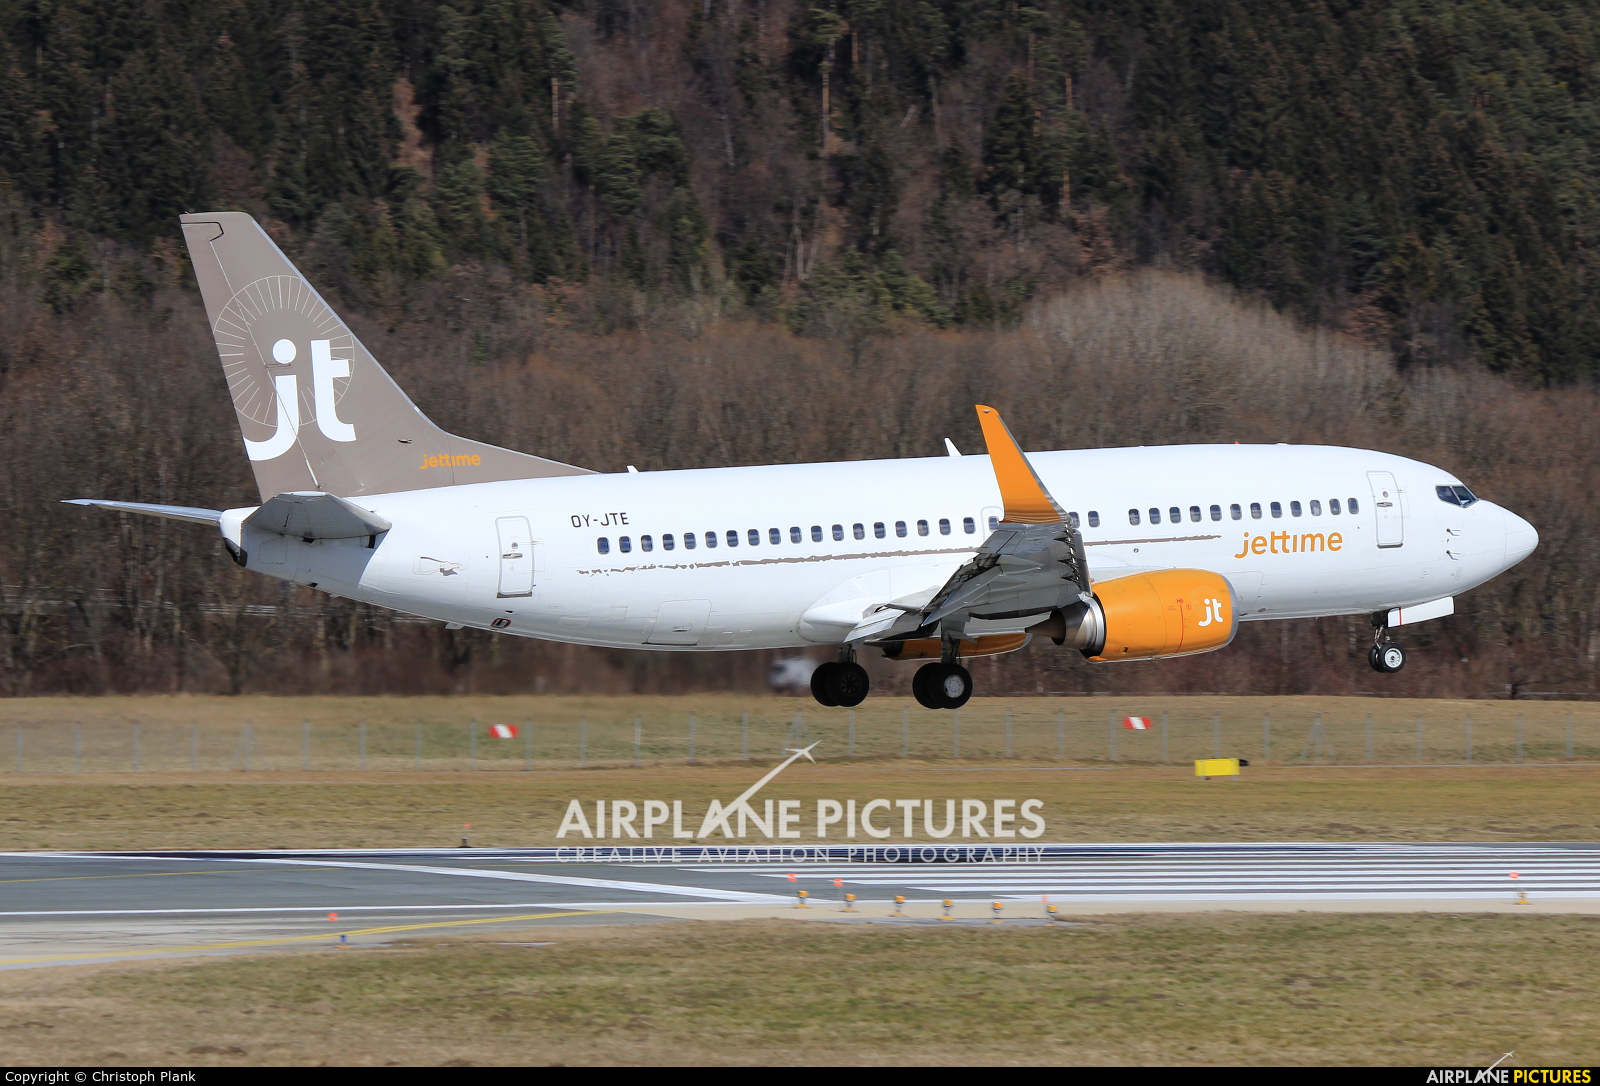 Jet Time OY-JTE aircraft at Innsbruck